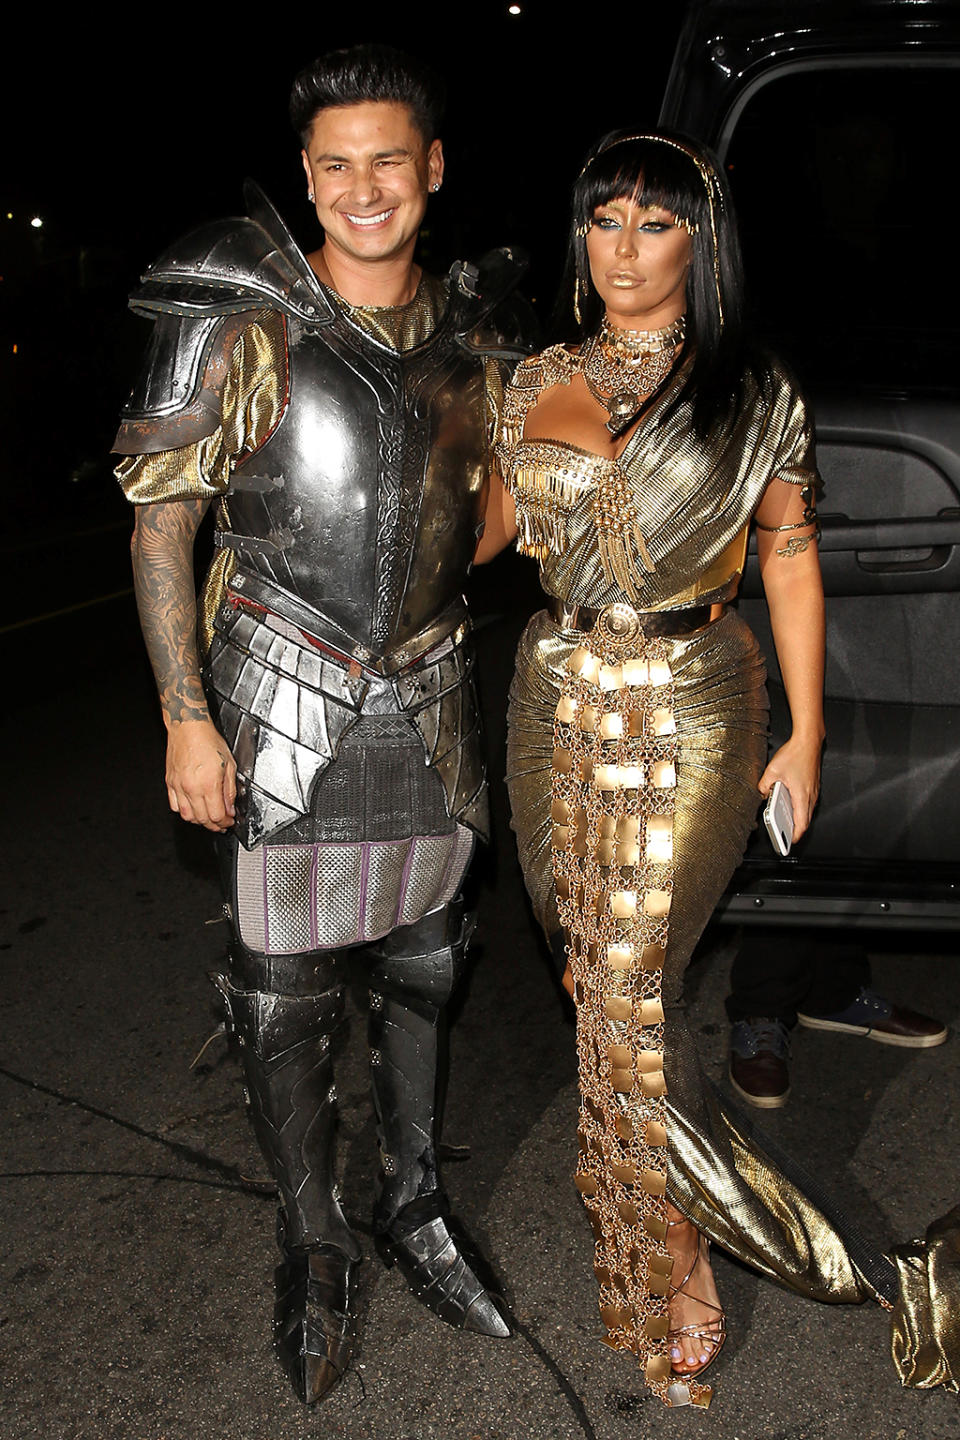 Pauly D and Aubrey O’Day